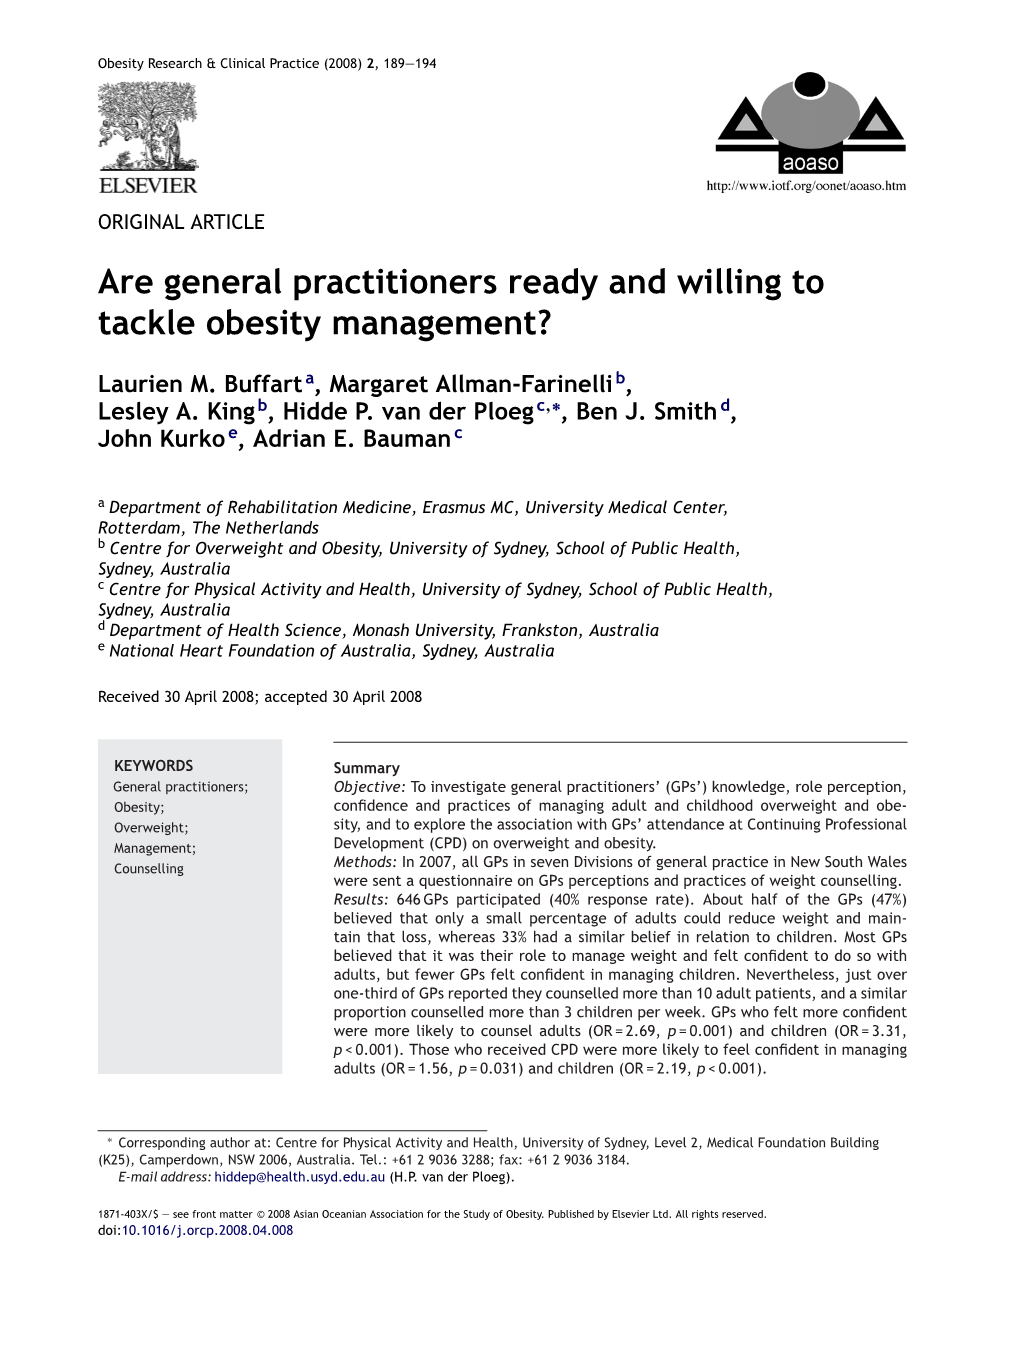 Are General Practitioners Ready and Willing to Tackle Obesity Management?